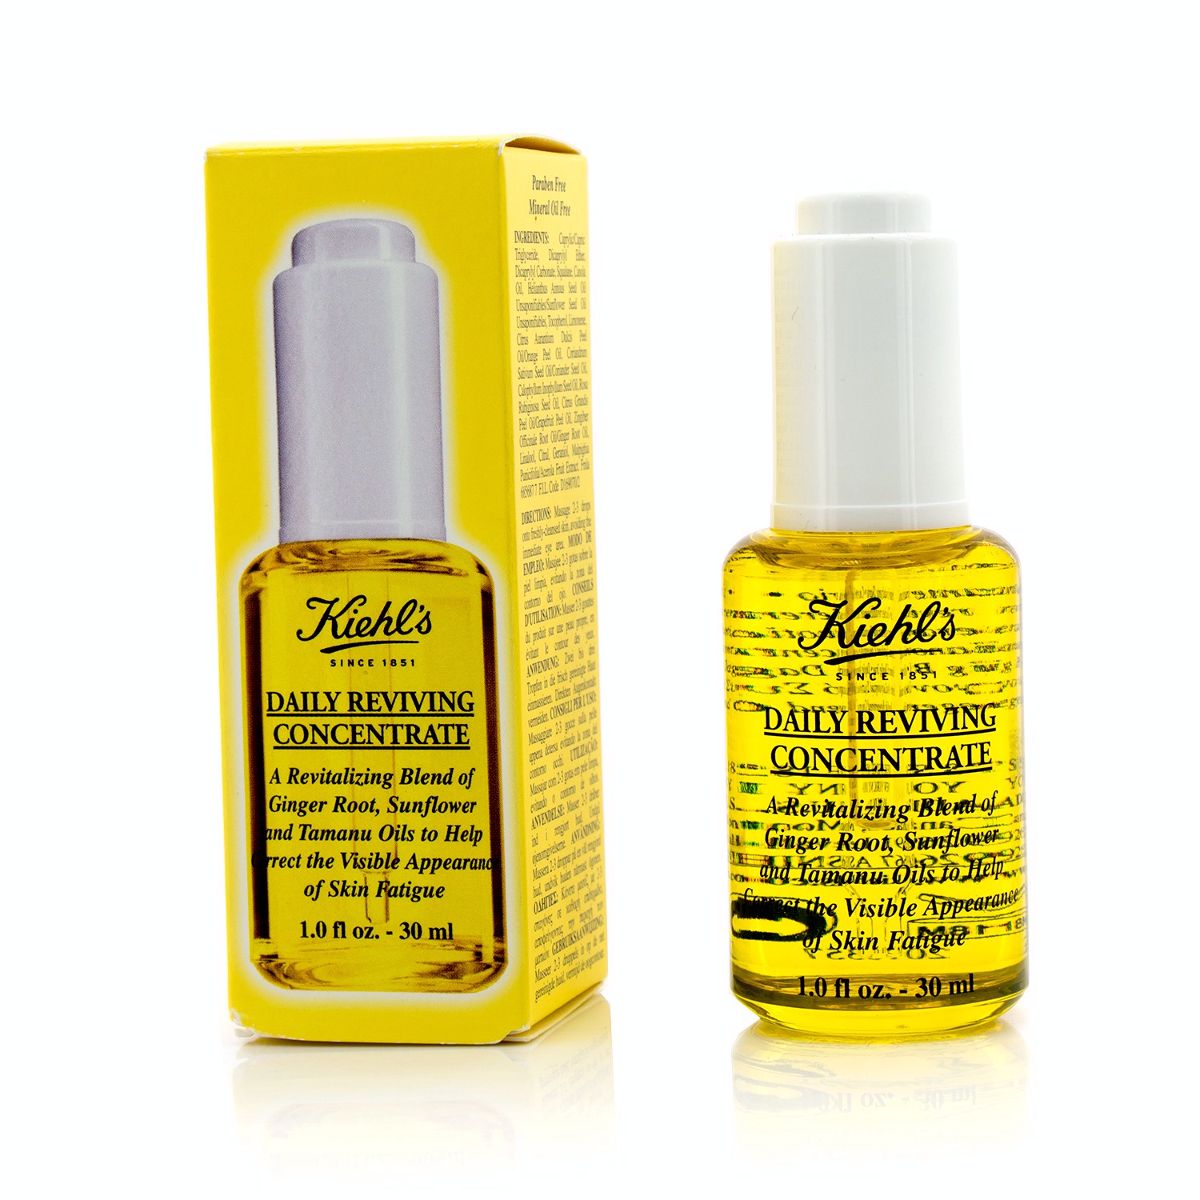 Daily Reviving Concentrate Kiehls Image